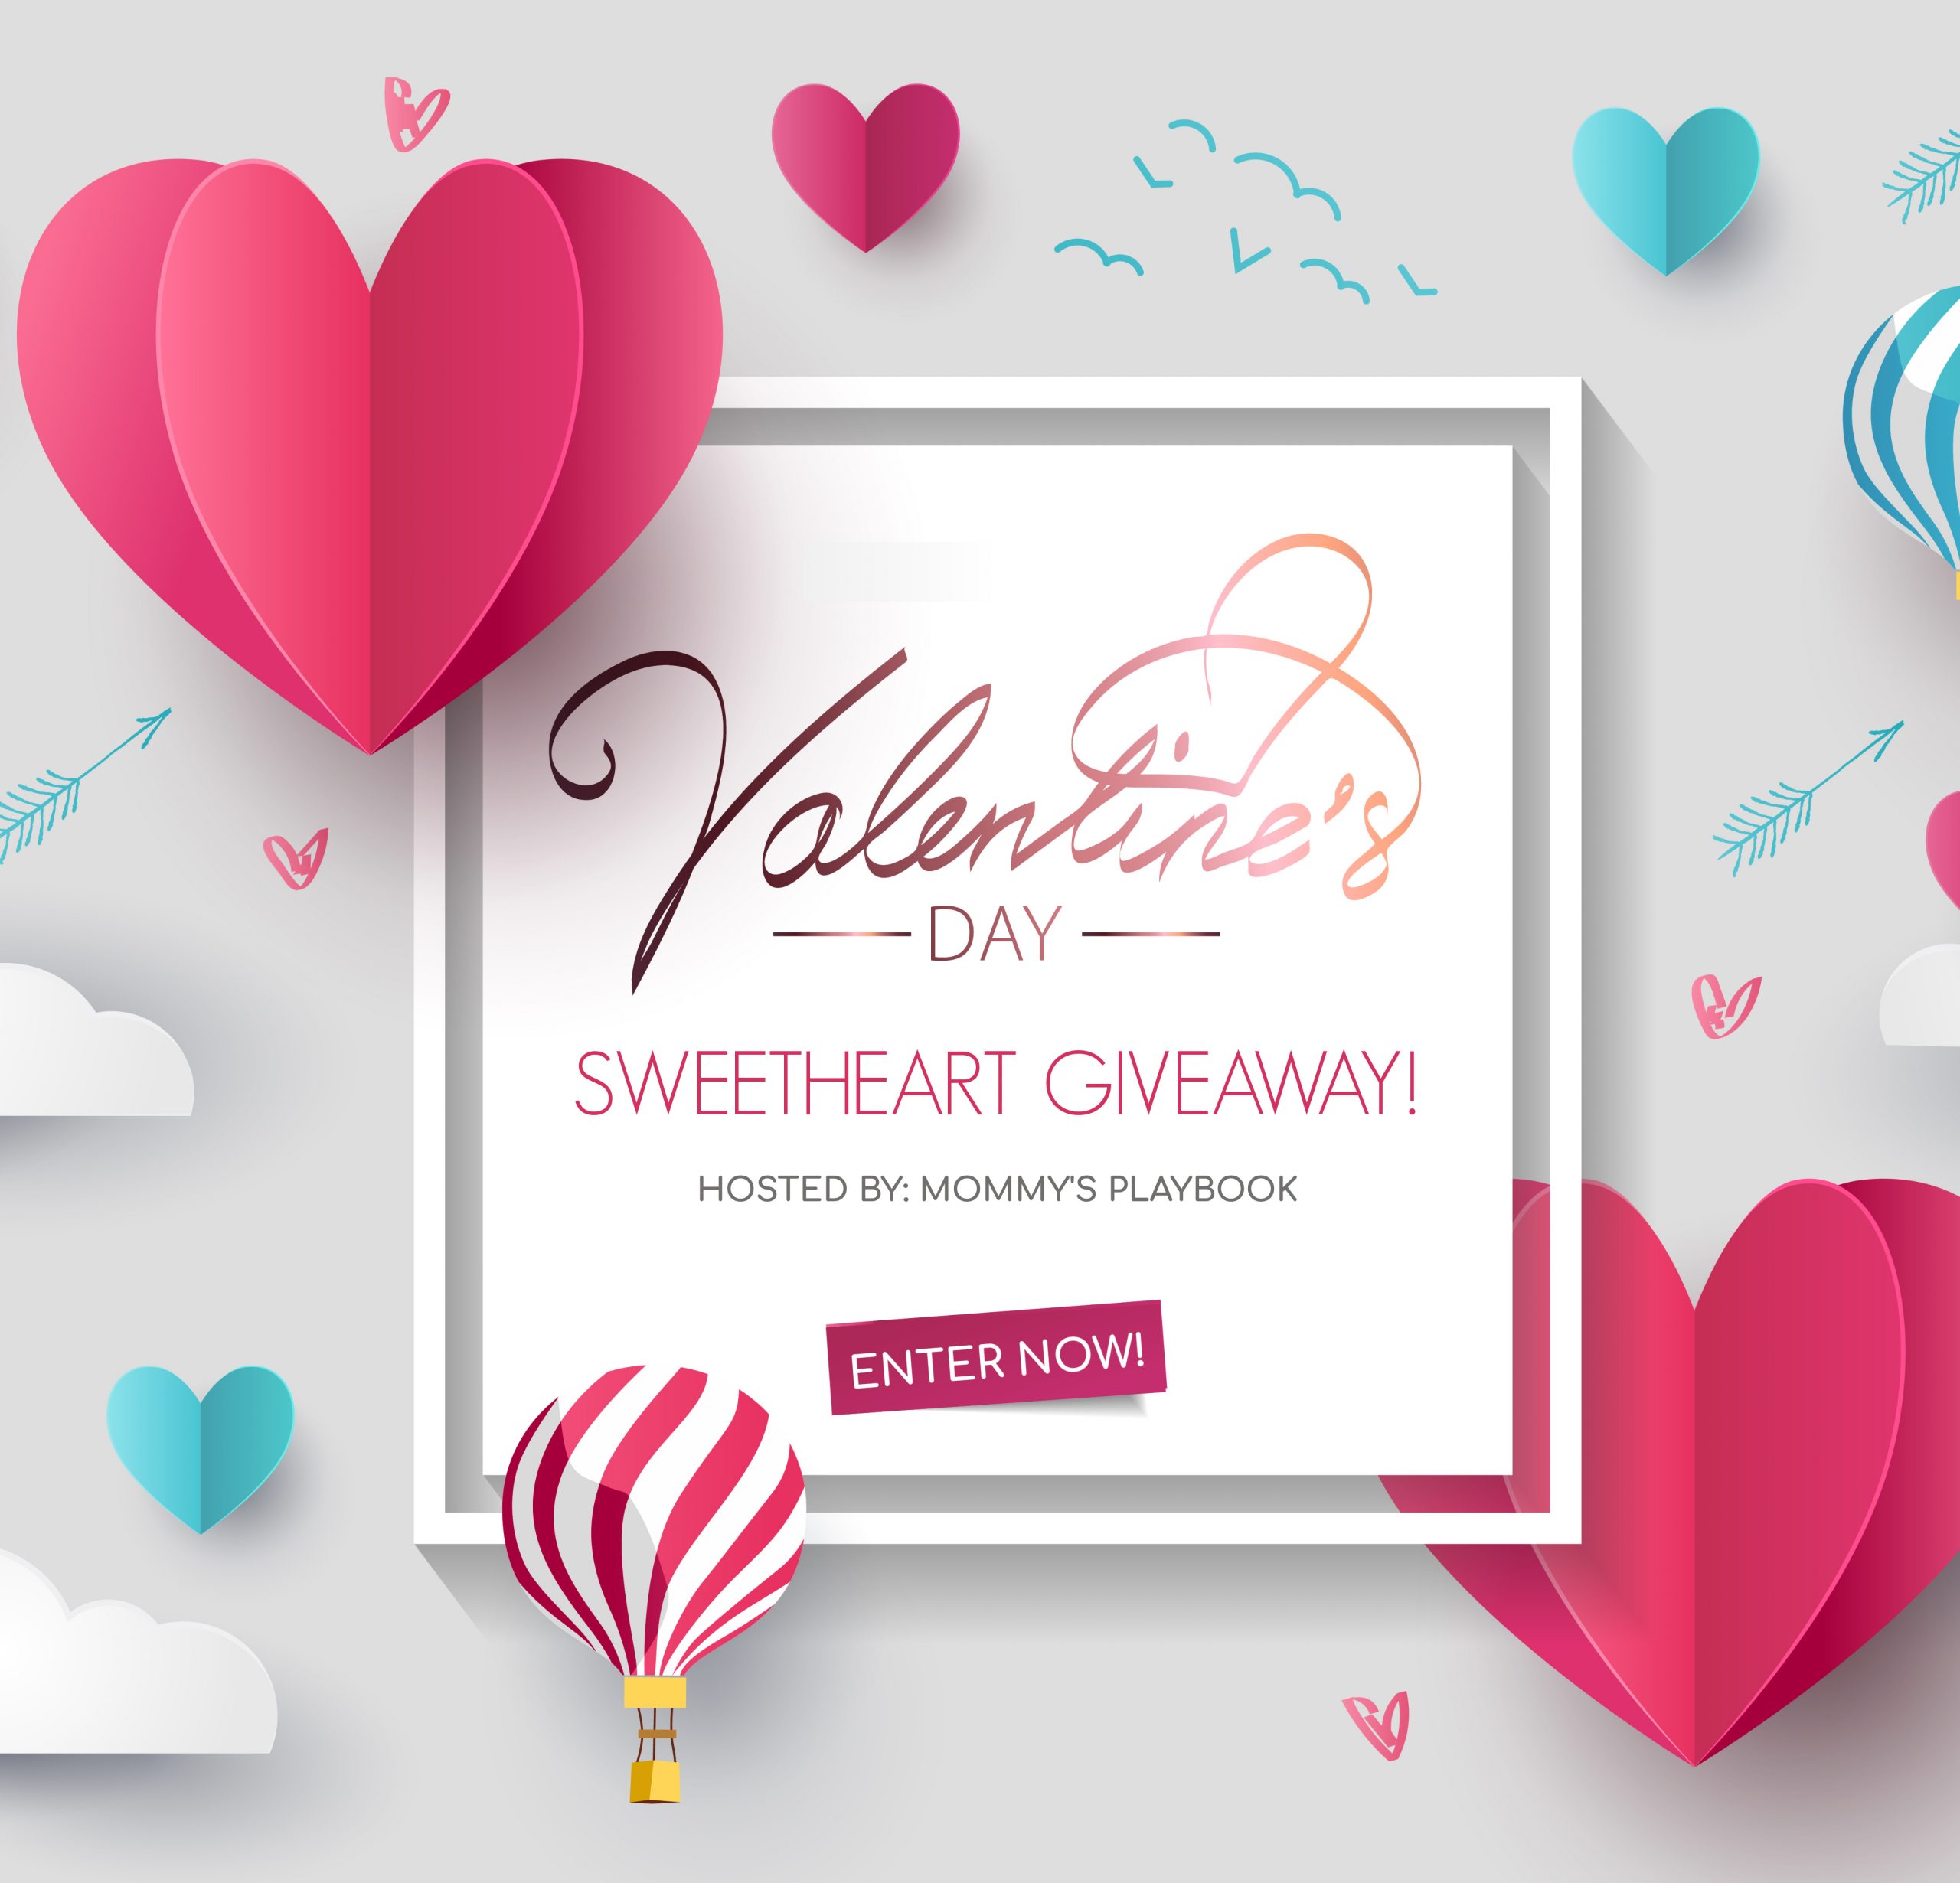 Valentine's Day Sweetheart Grand Prize Event